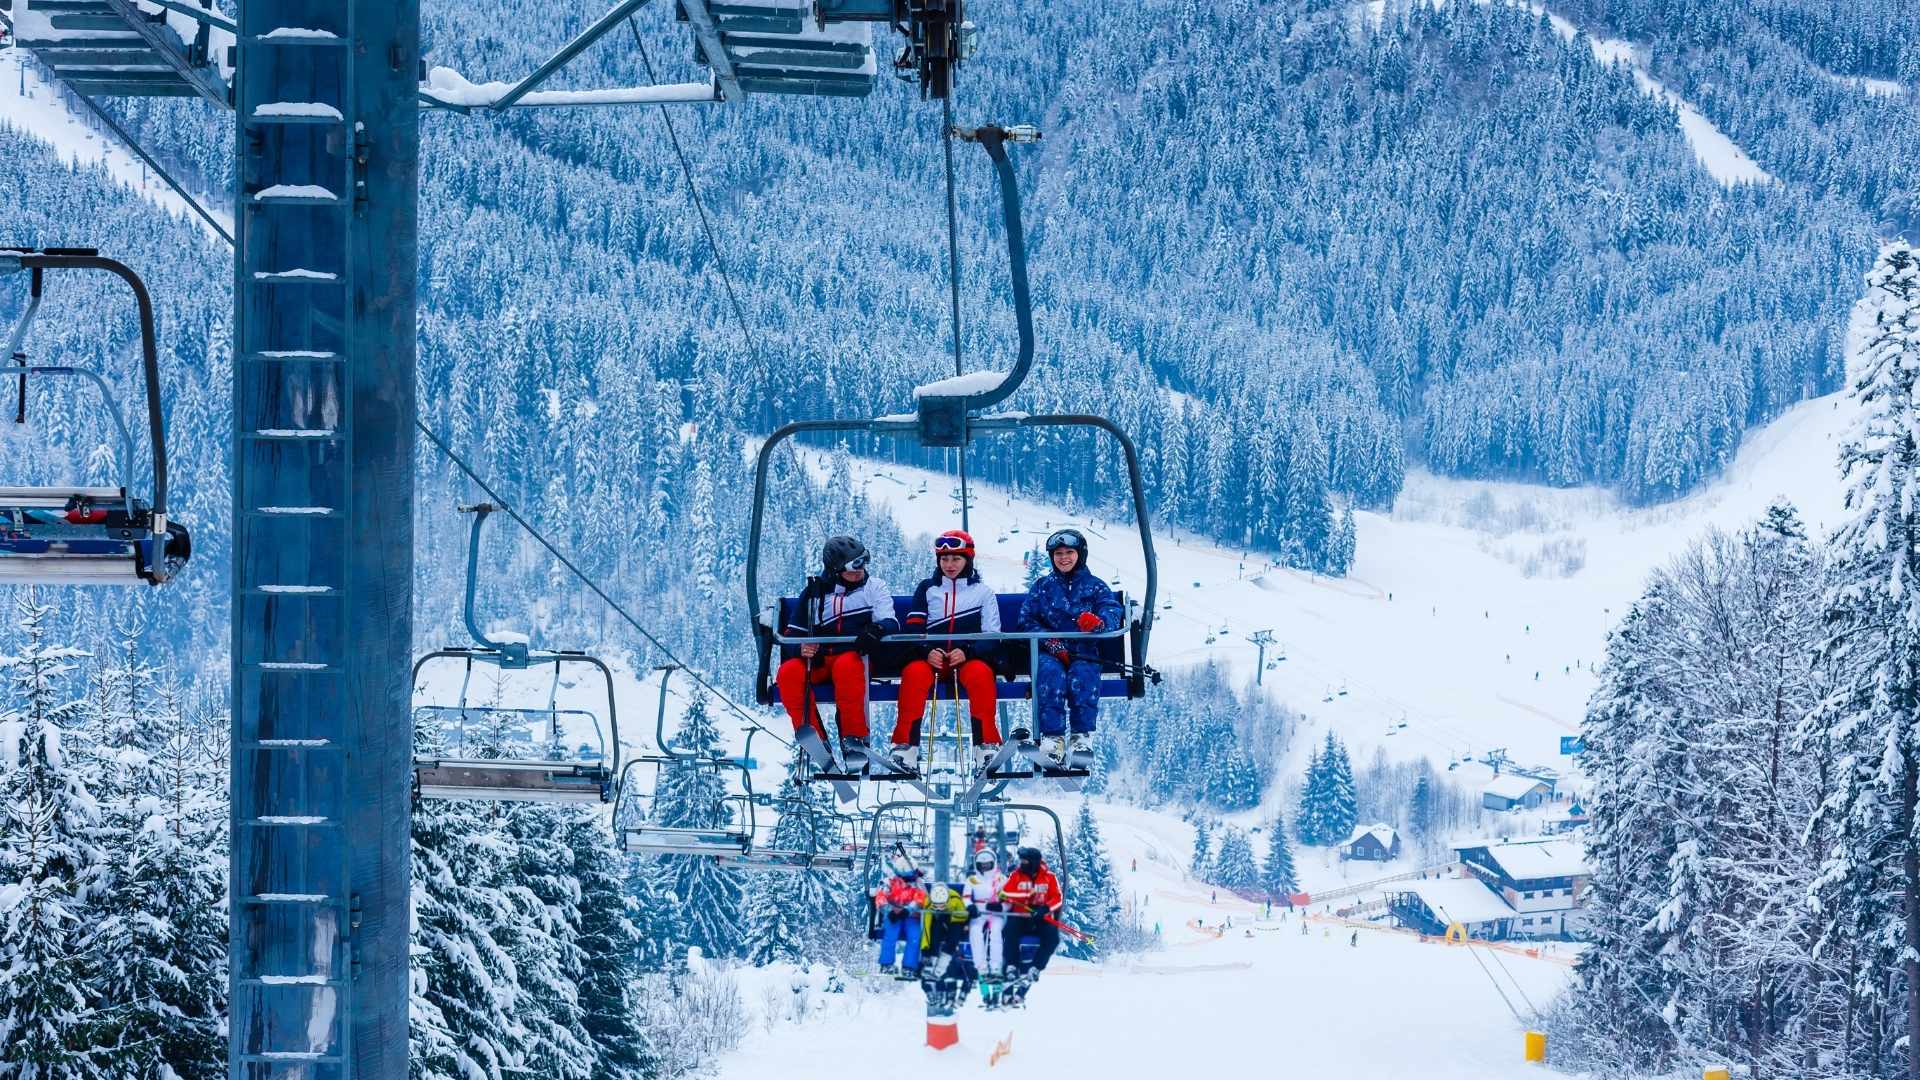 Chairlift with three people on a snowy mountain